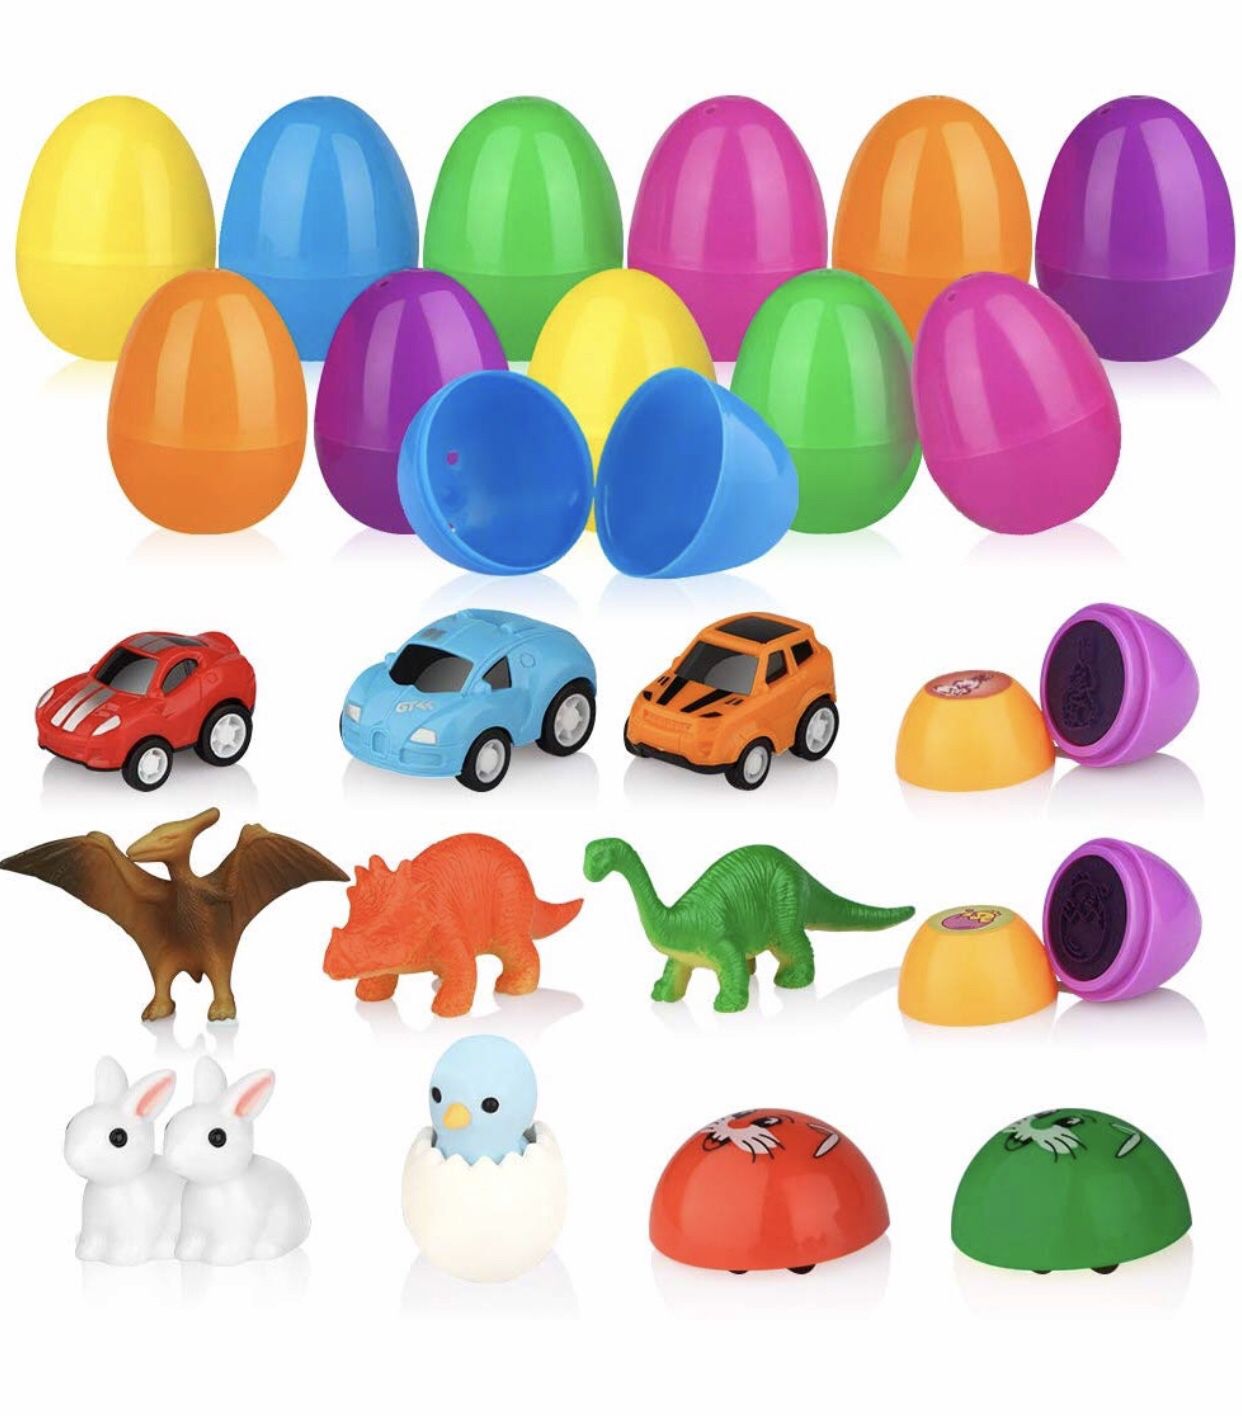 Baztoy Easter Eggs Plastic Bulk Easter Toy Gifts Party Favor Filler with Surprise Mini Toys contain Dinosaurs Vehicles Rabbits Stampers and Nestling,